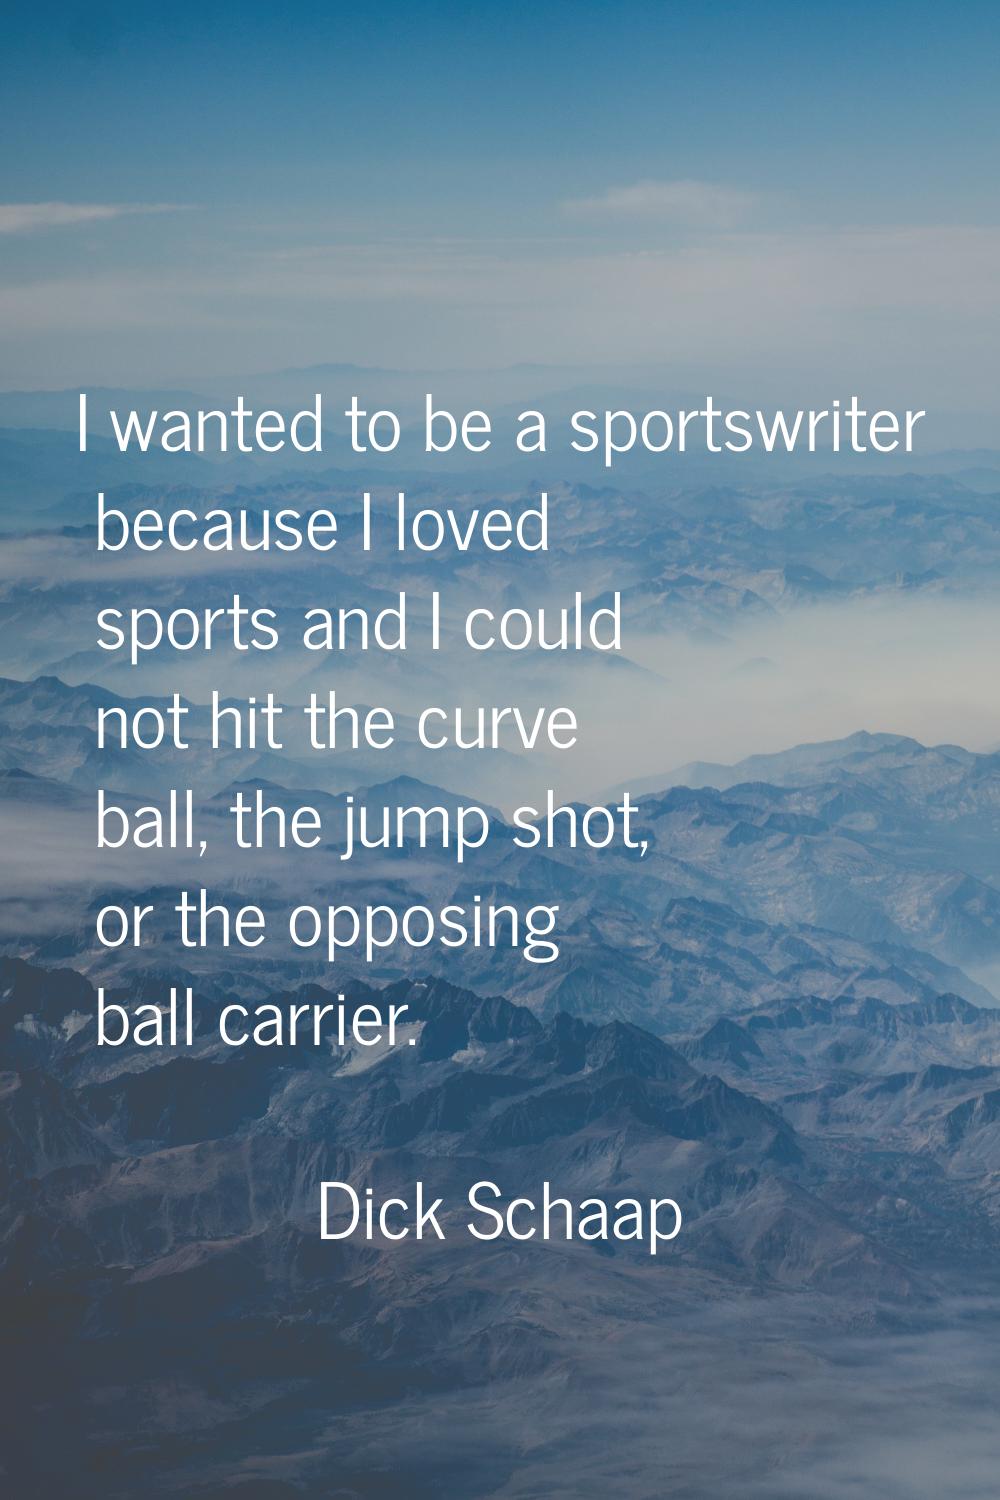 I wanted to be a sportswriter because I loved sports and I could not hit the curve ball, the jump s